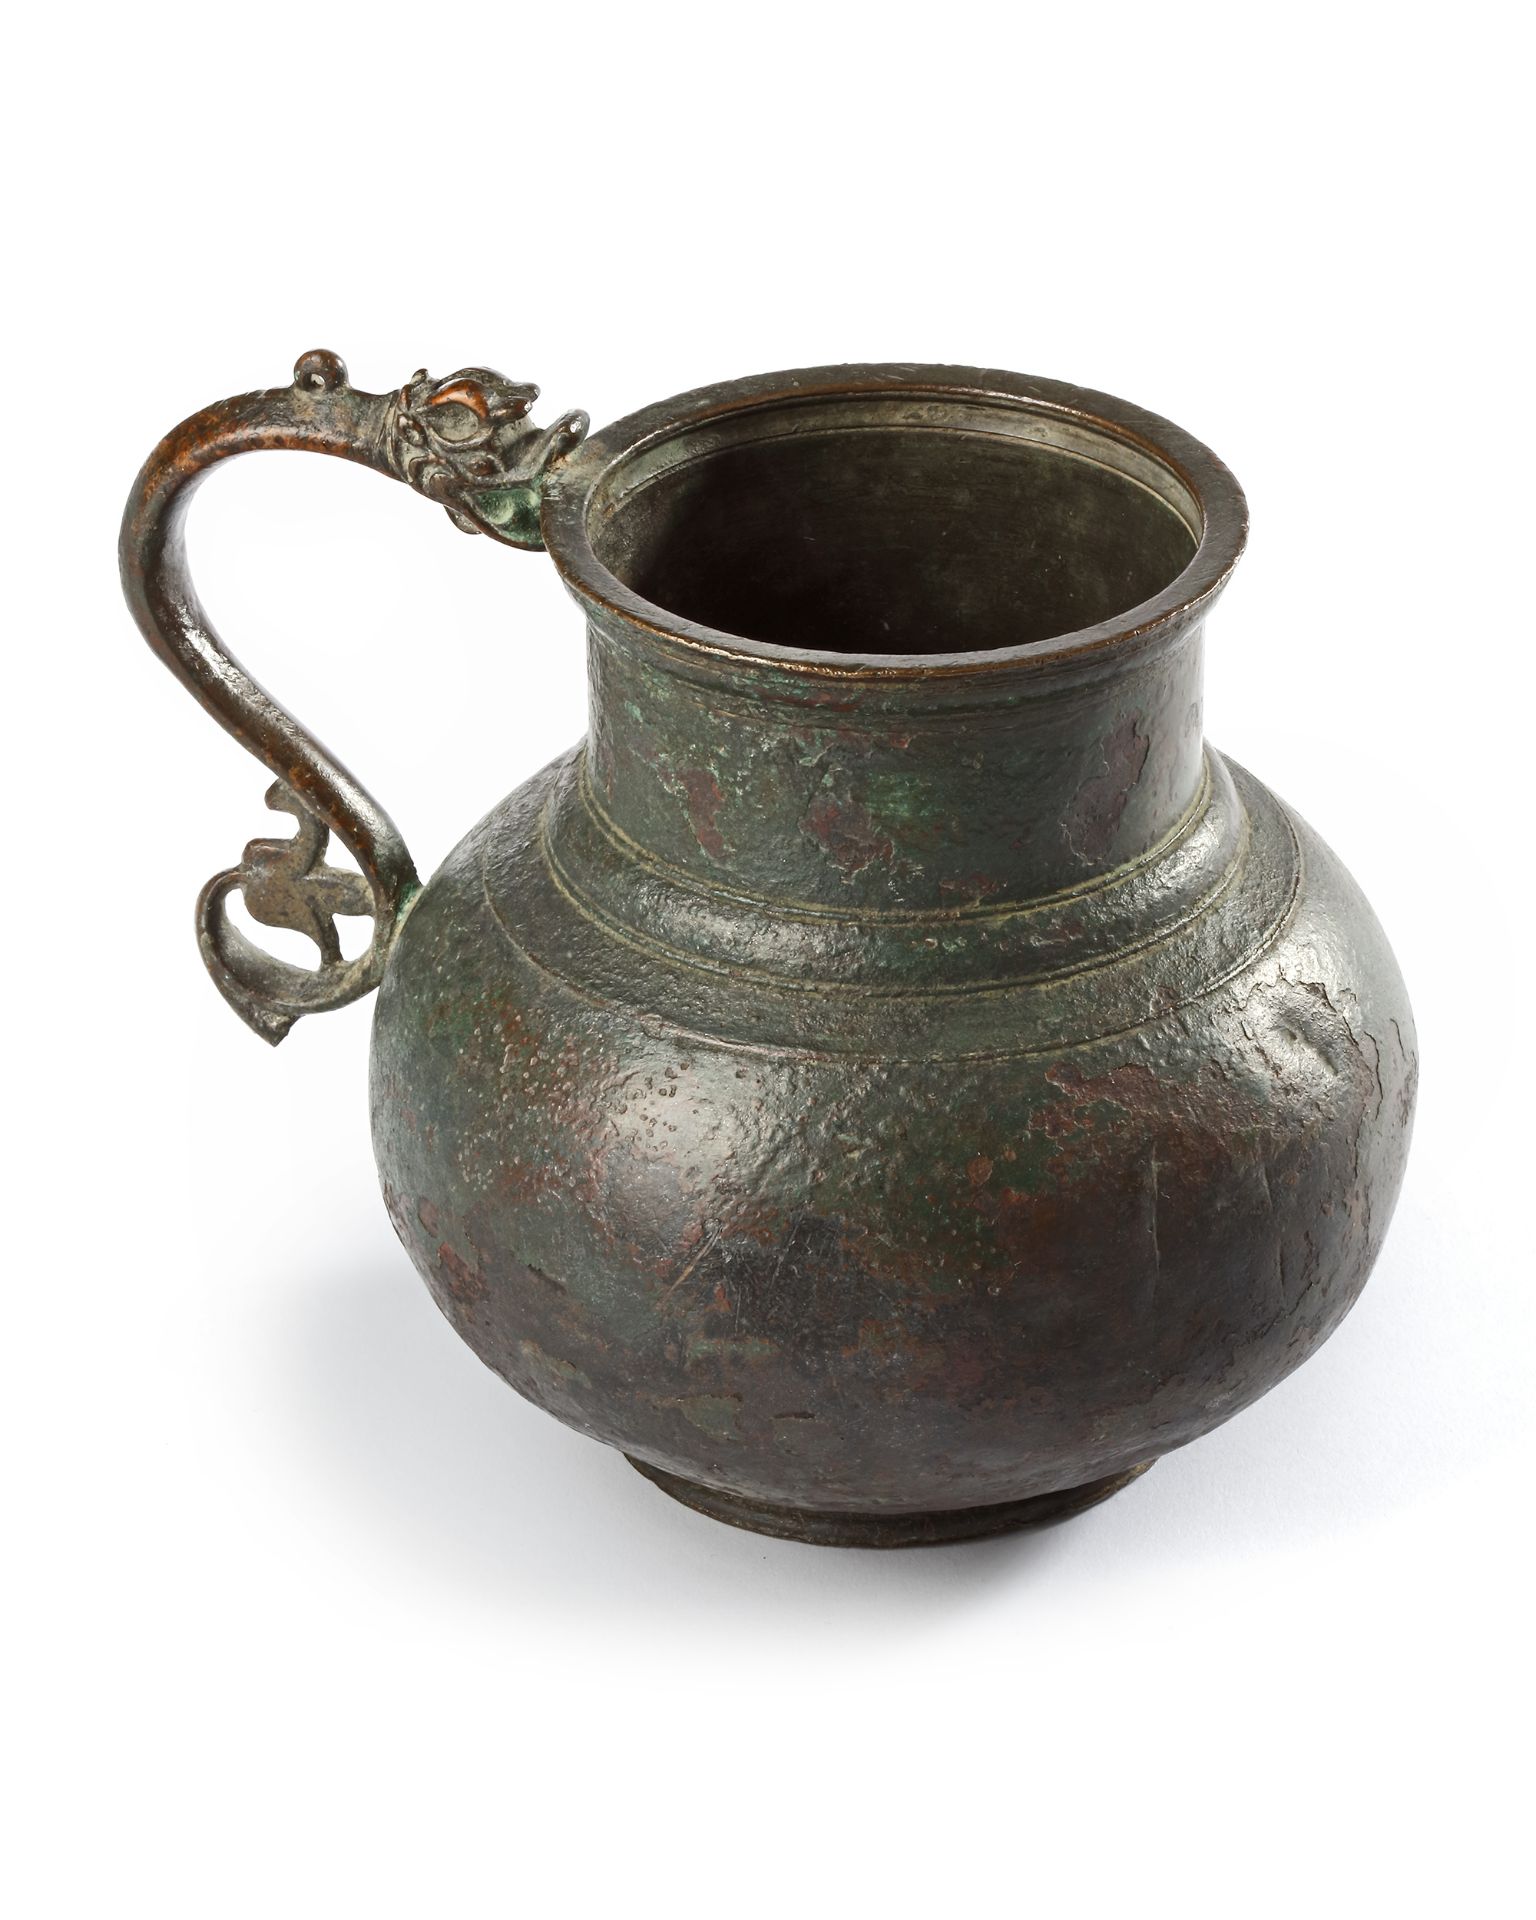 A TIMURID DRAGON-HANDLED JUG, CENTRAL ASIA, LATE 14TH- EARLY 15TH CENTURY - Image 6 of 10